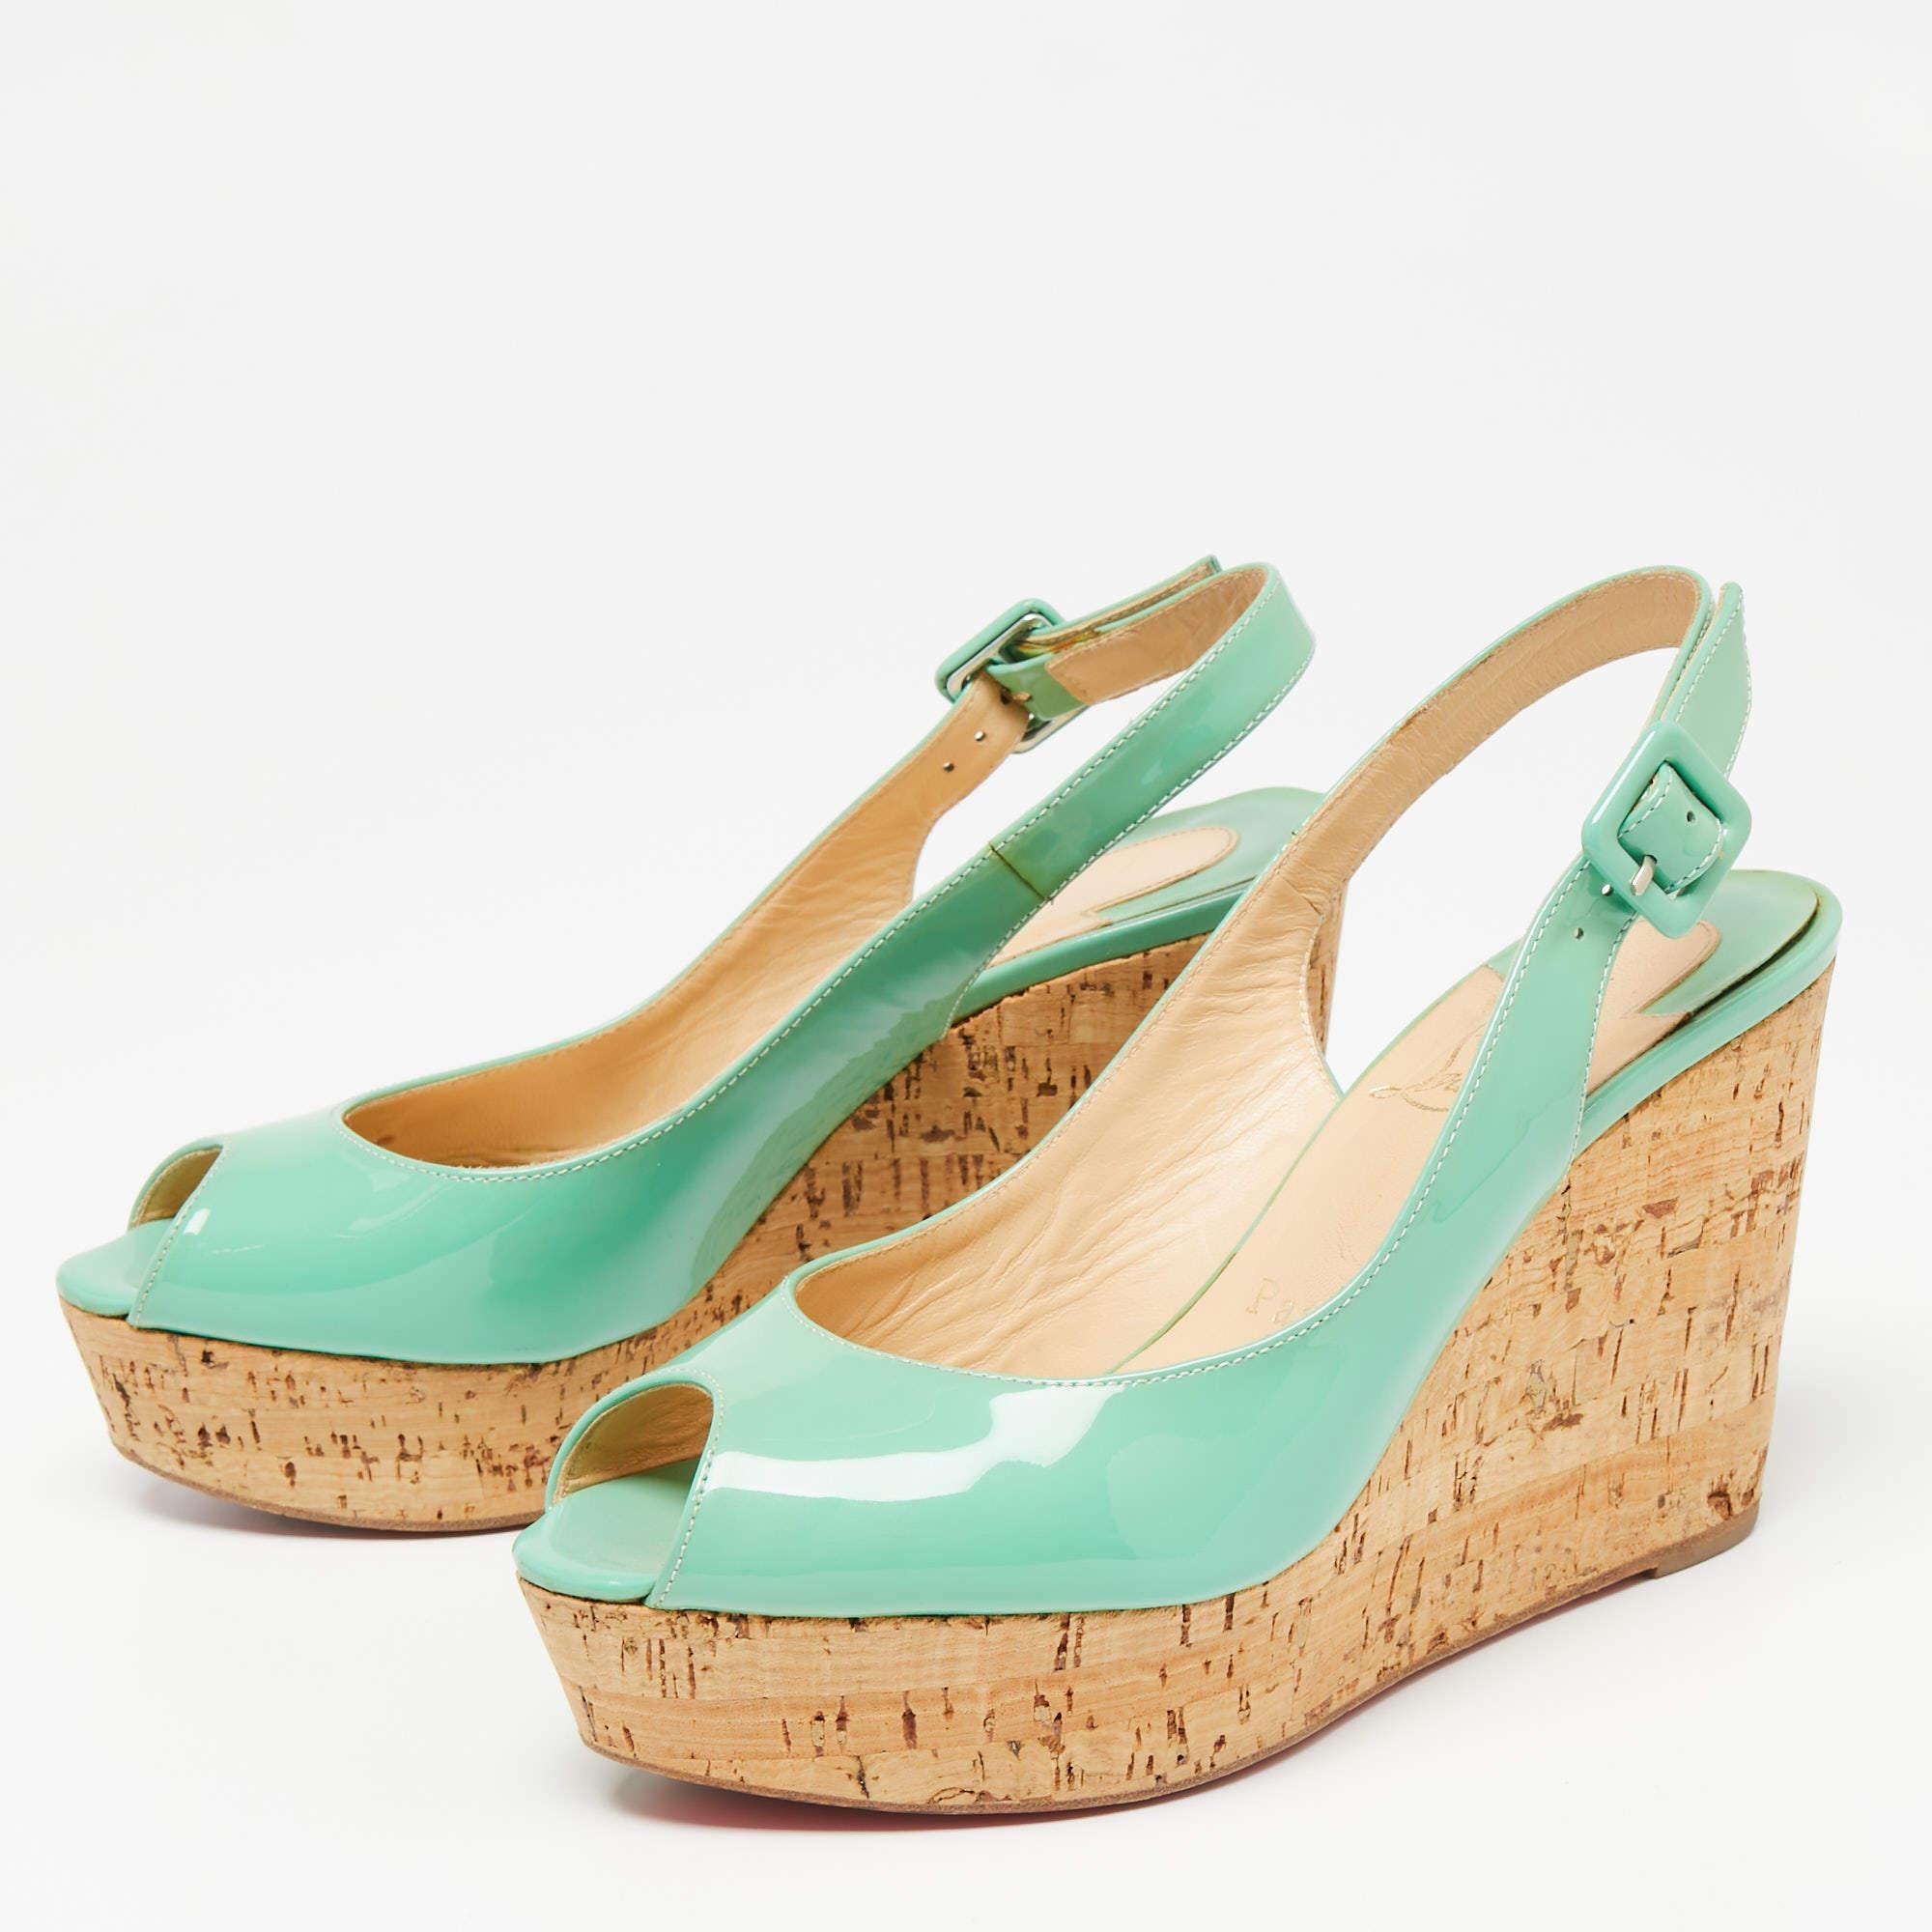 Christian Louboutin Green Patent Leather Peep Toe Wedge Sandals Size 36 In Good Condition For Sale In Dubai, Al Qouz 2